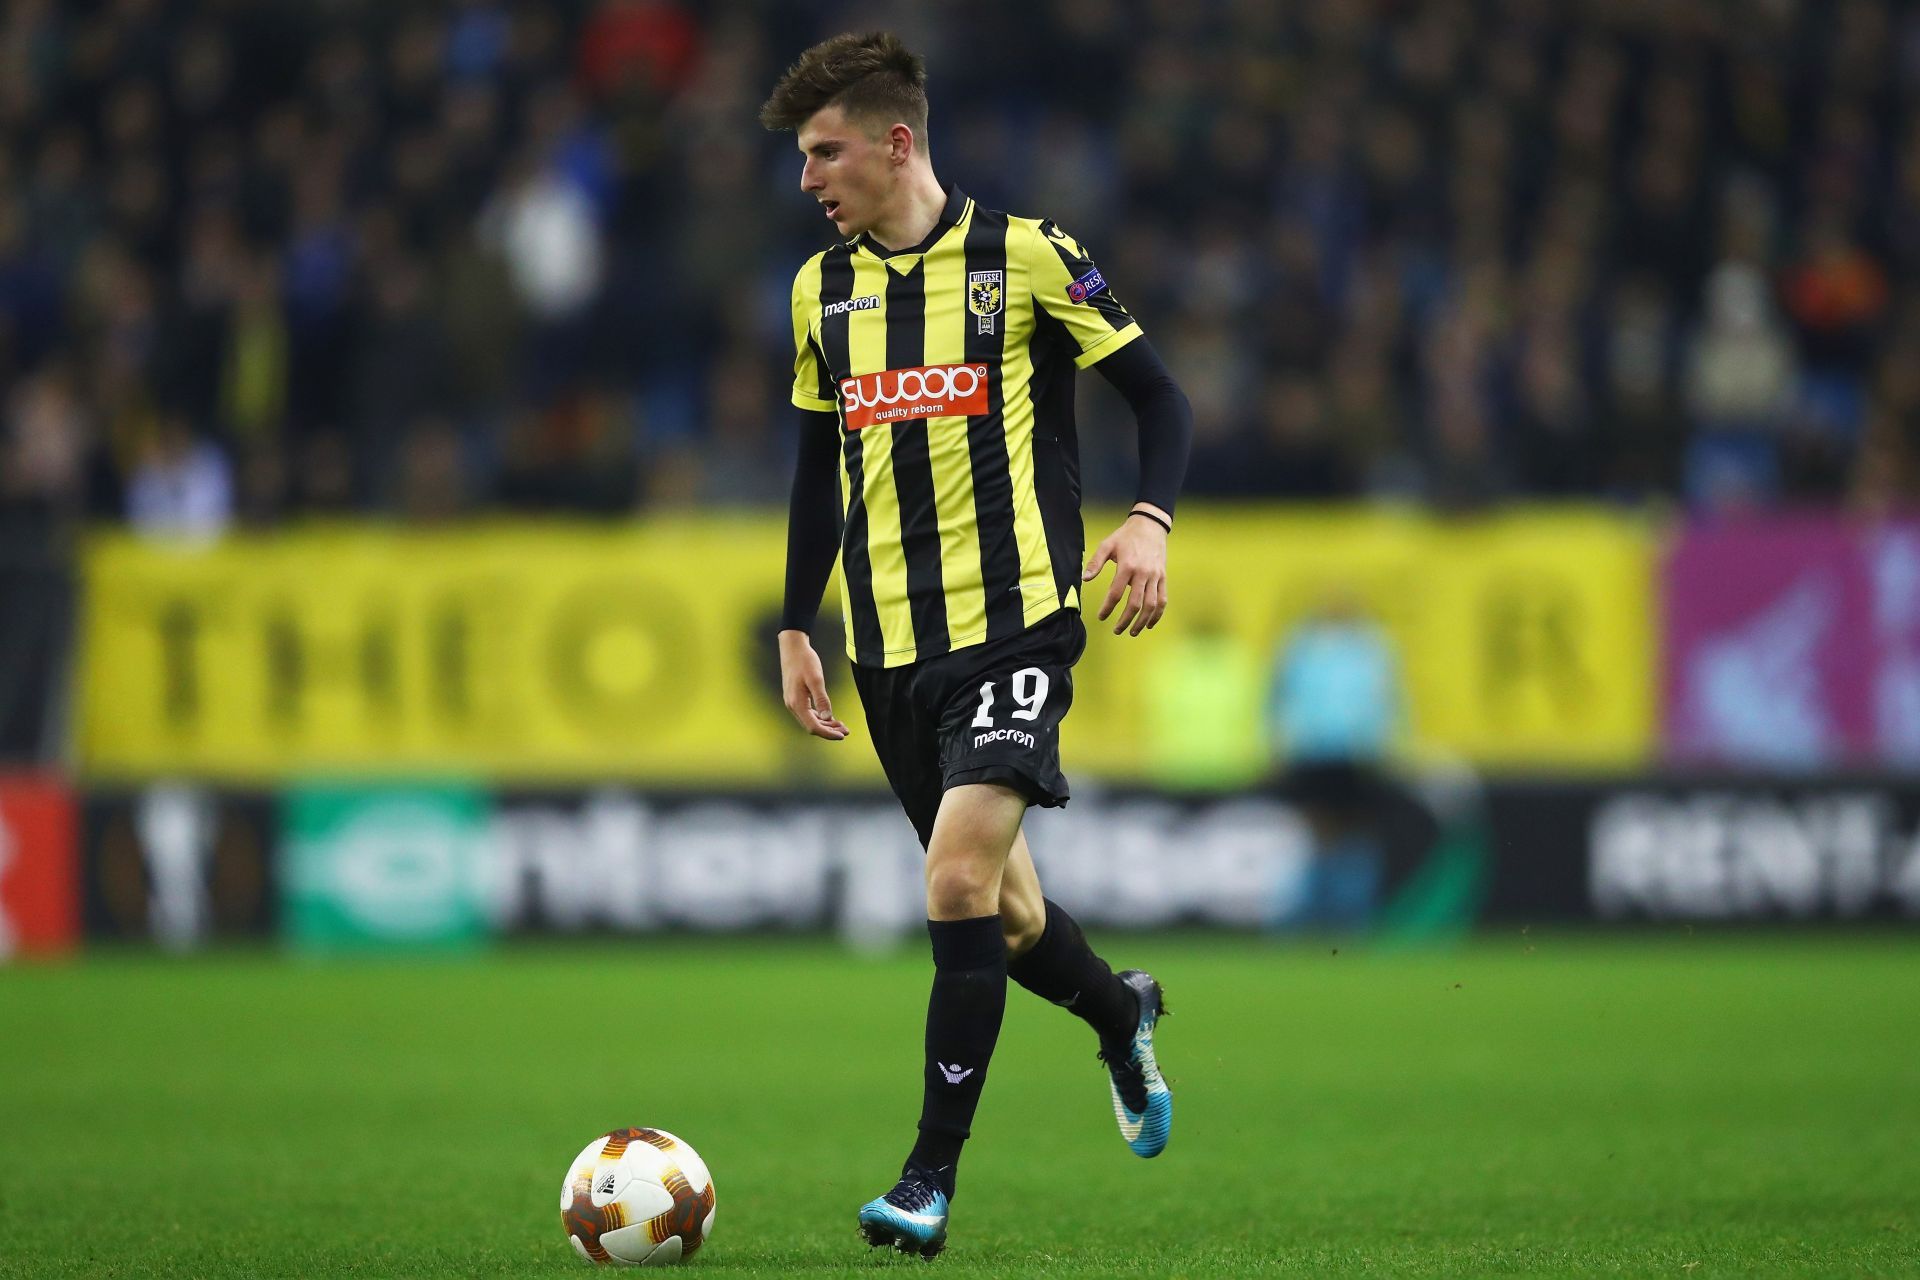 Mason Mount garnered interest from Ten Hag while on loan in the Eredivisie.